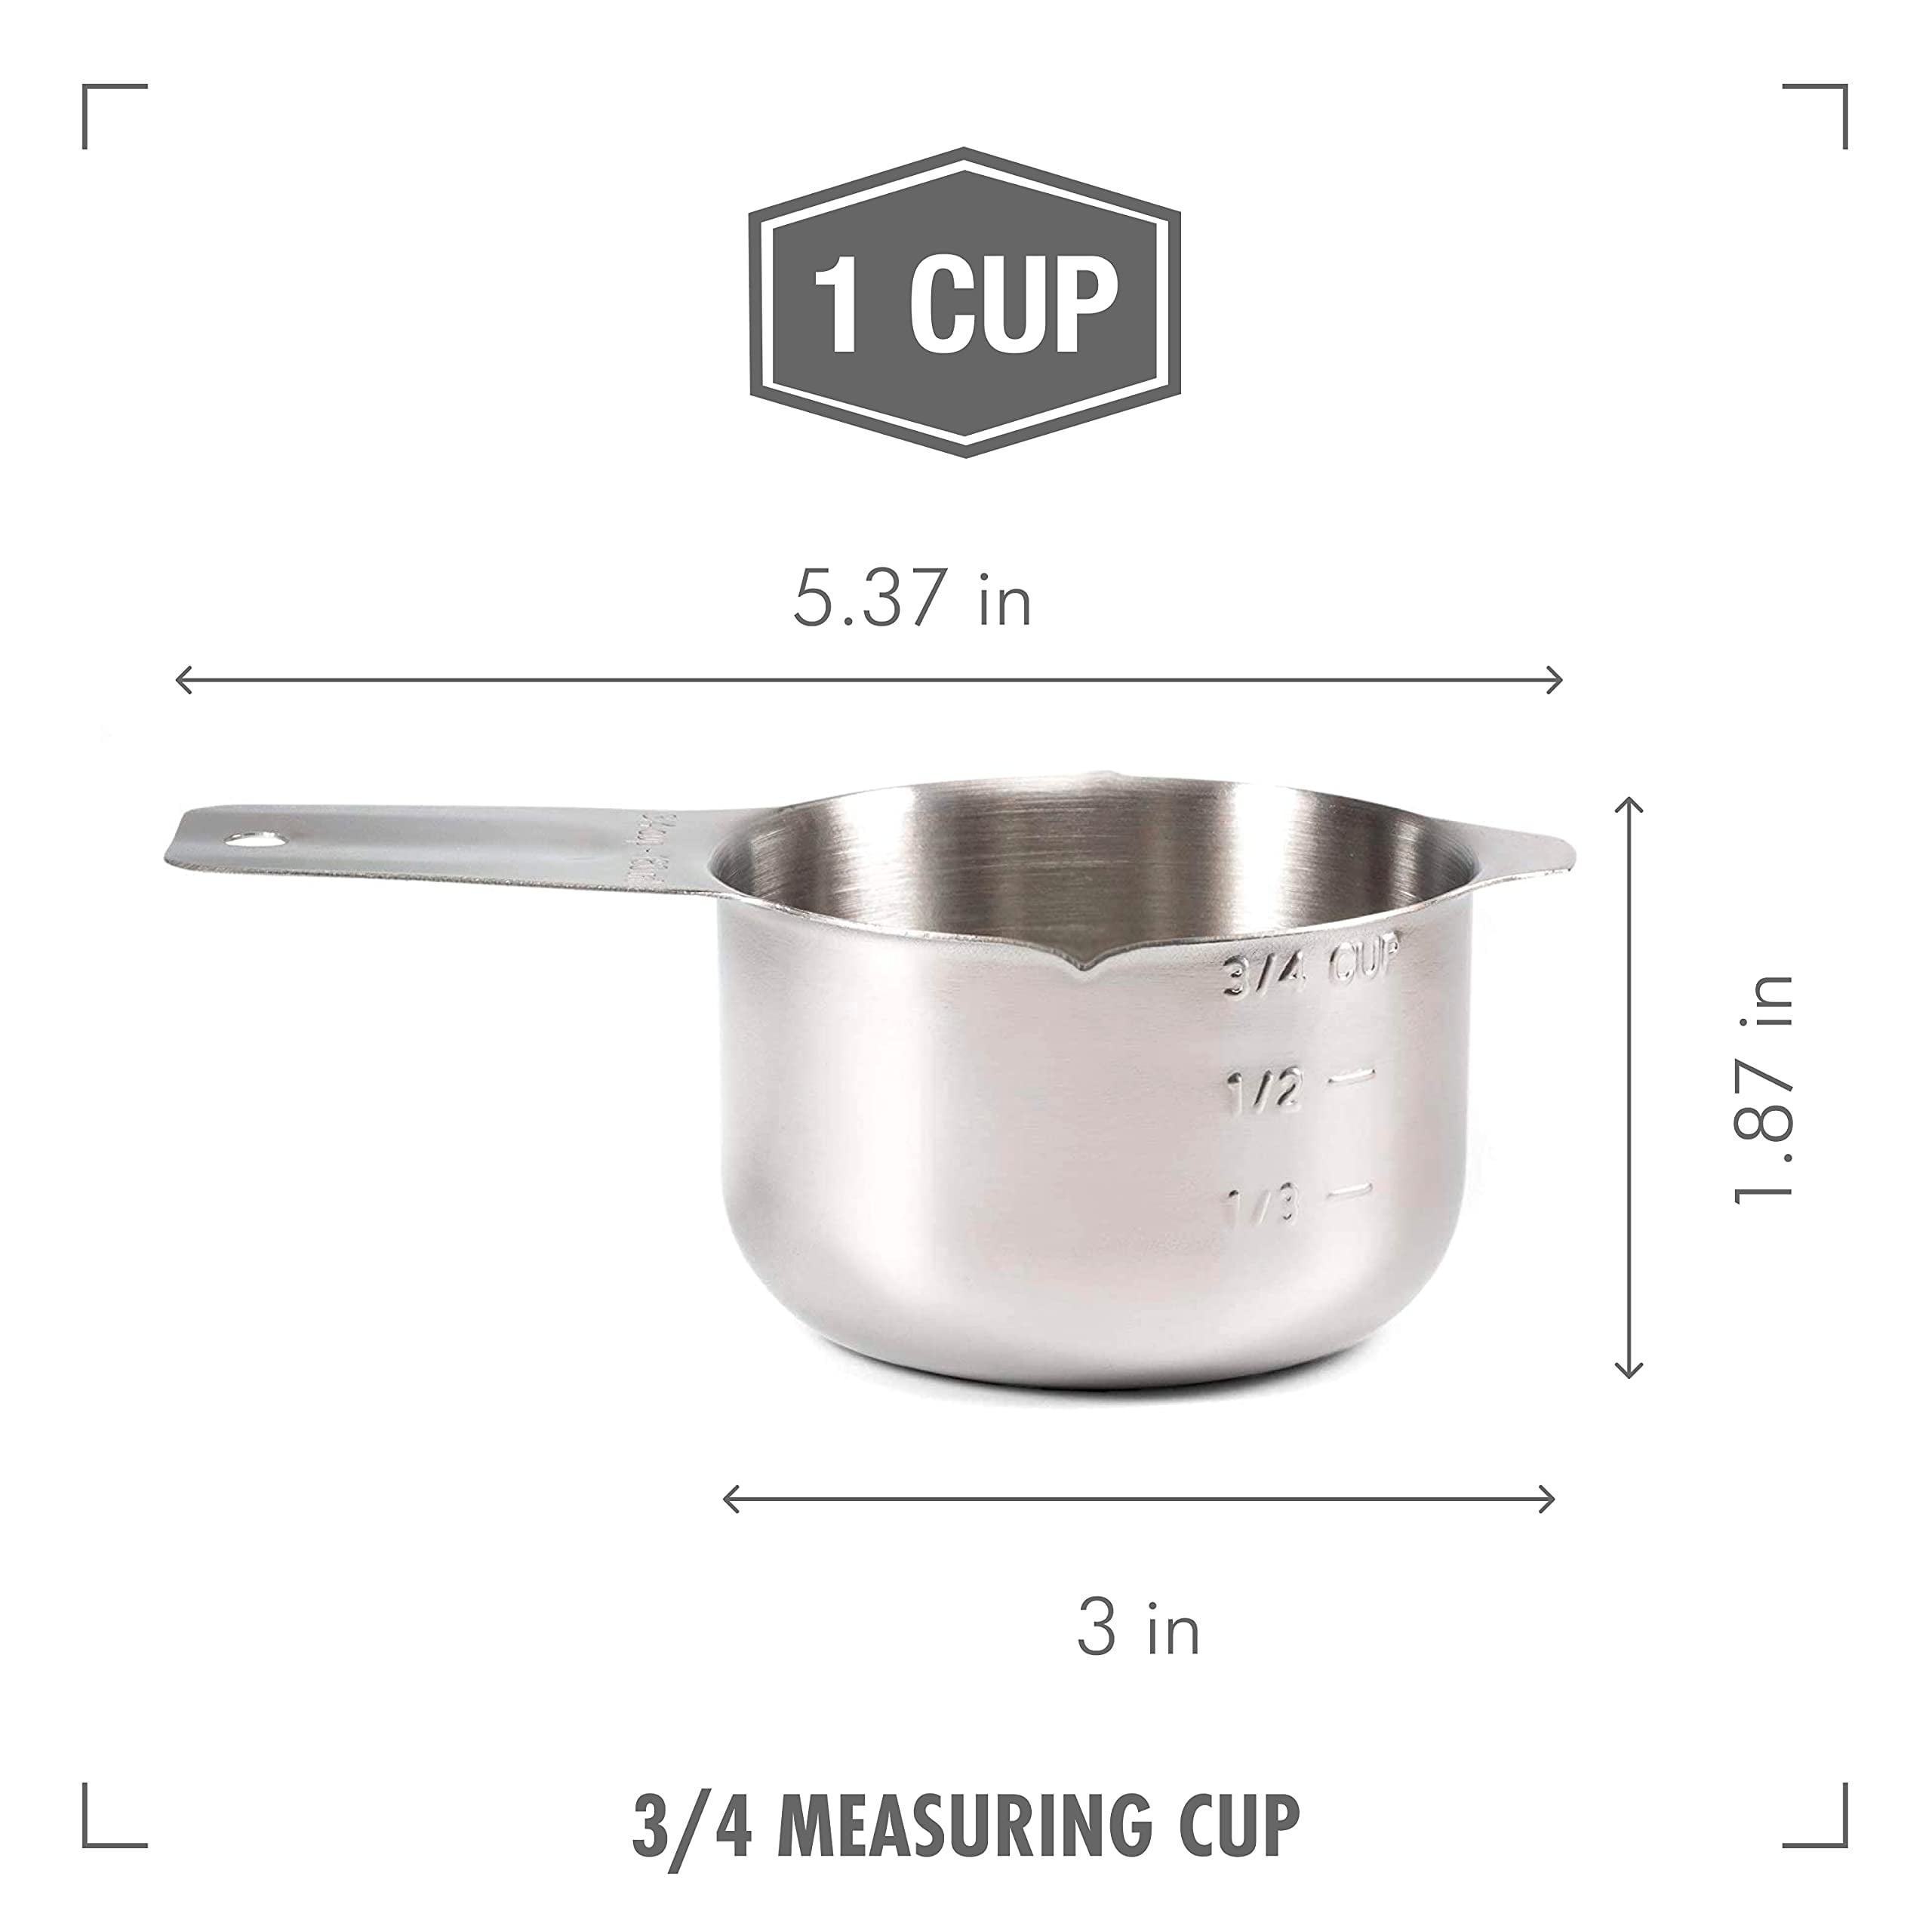  2lbDepot Gold Measuring Cups & Spoons Set of 14